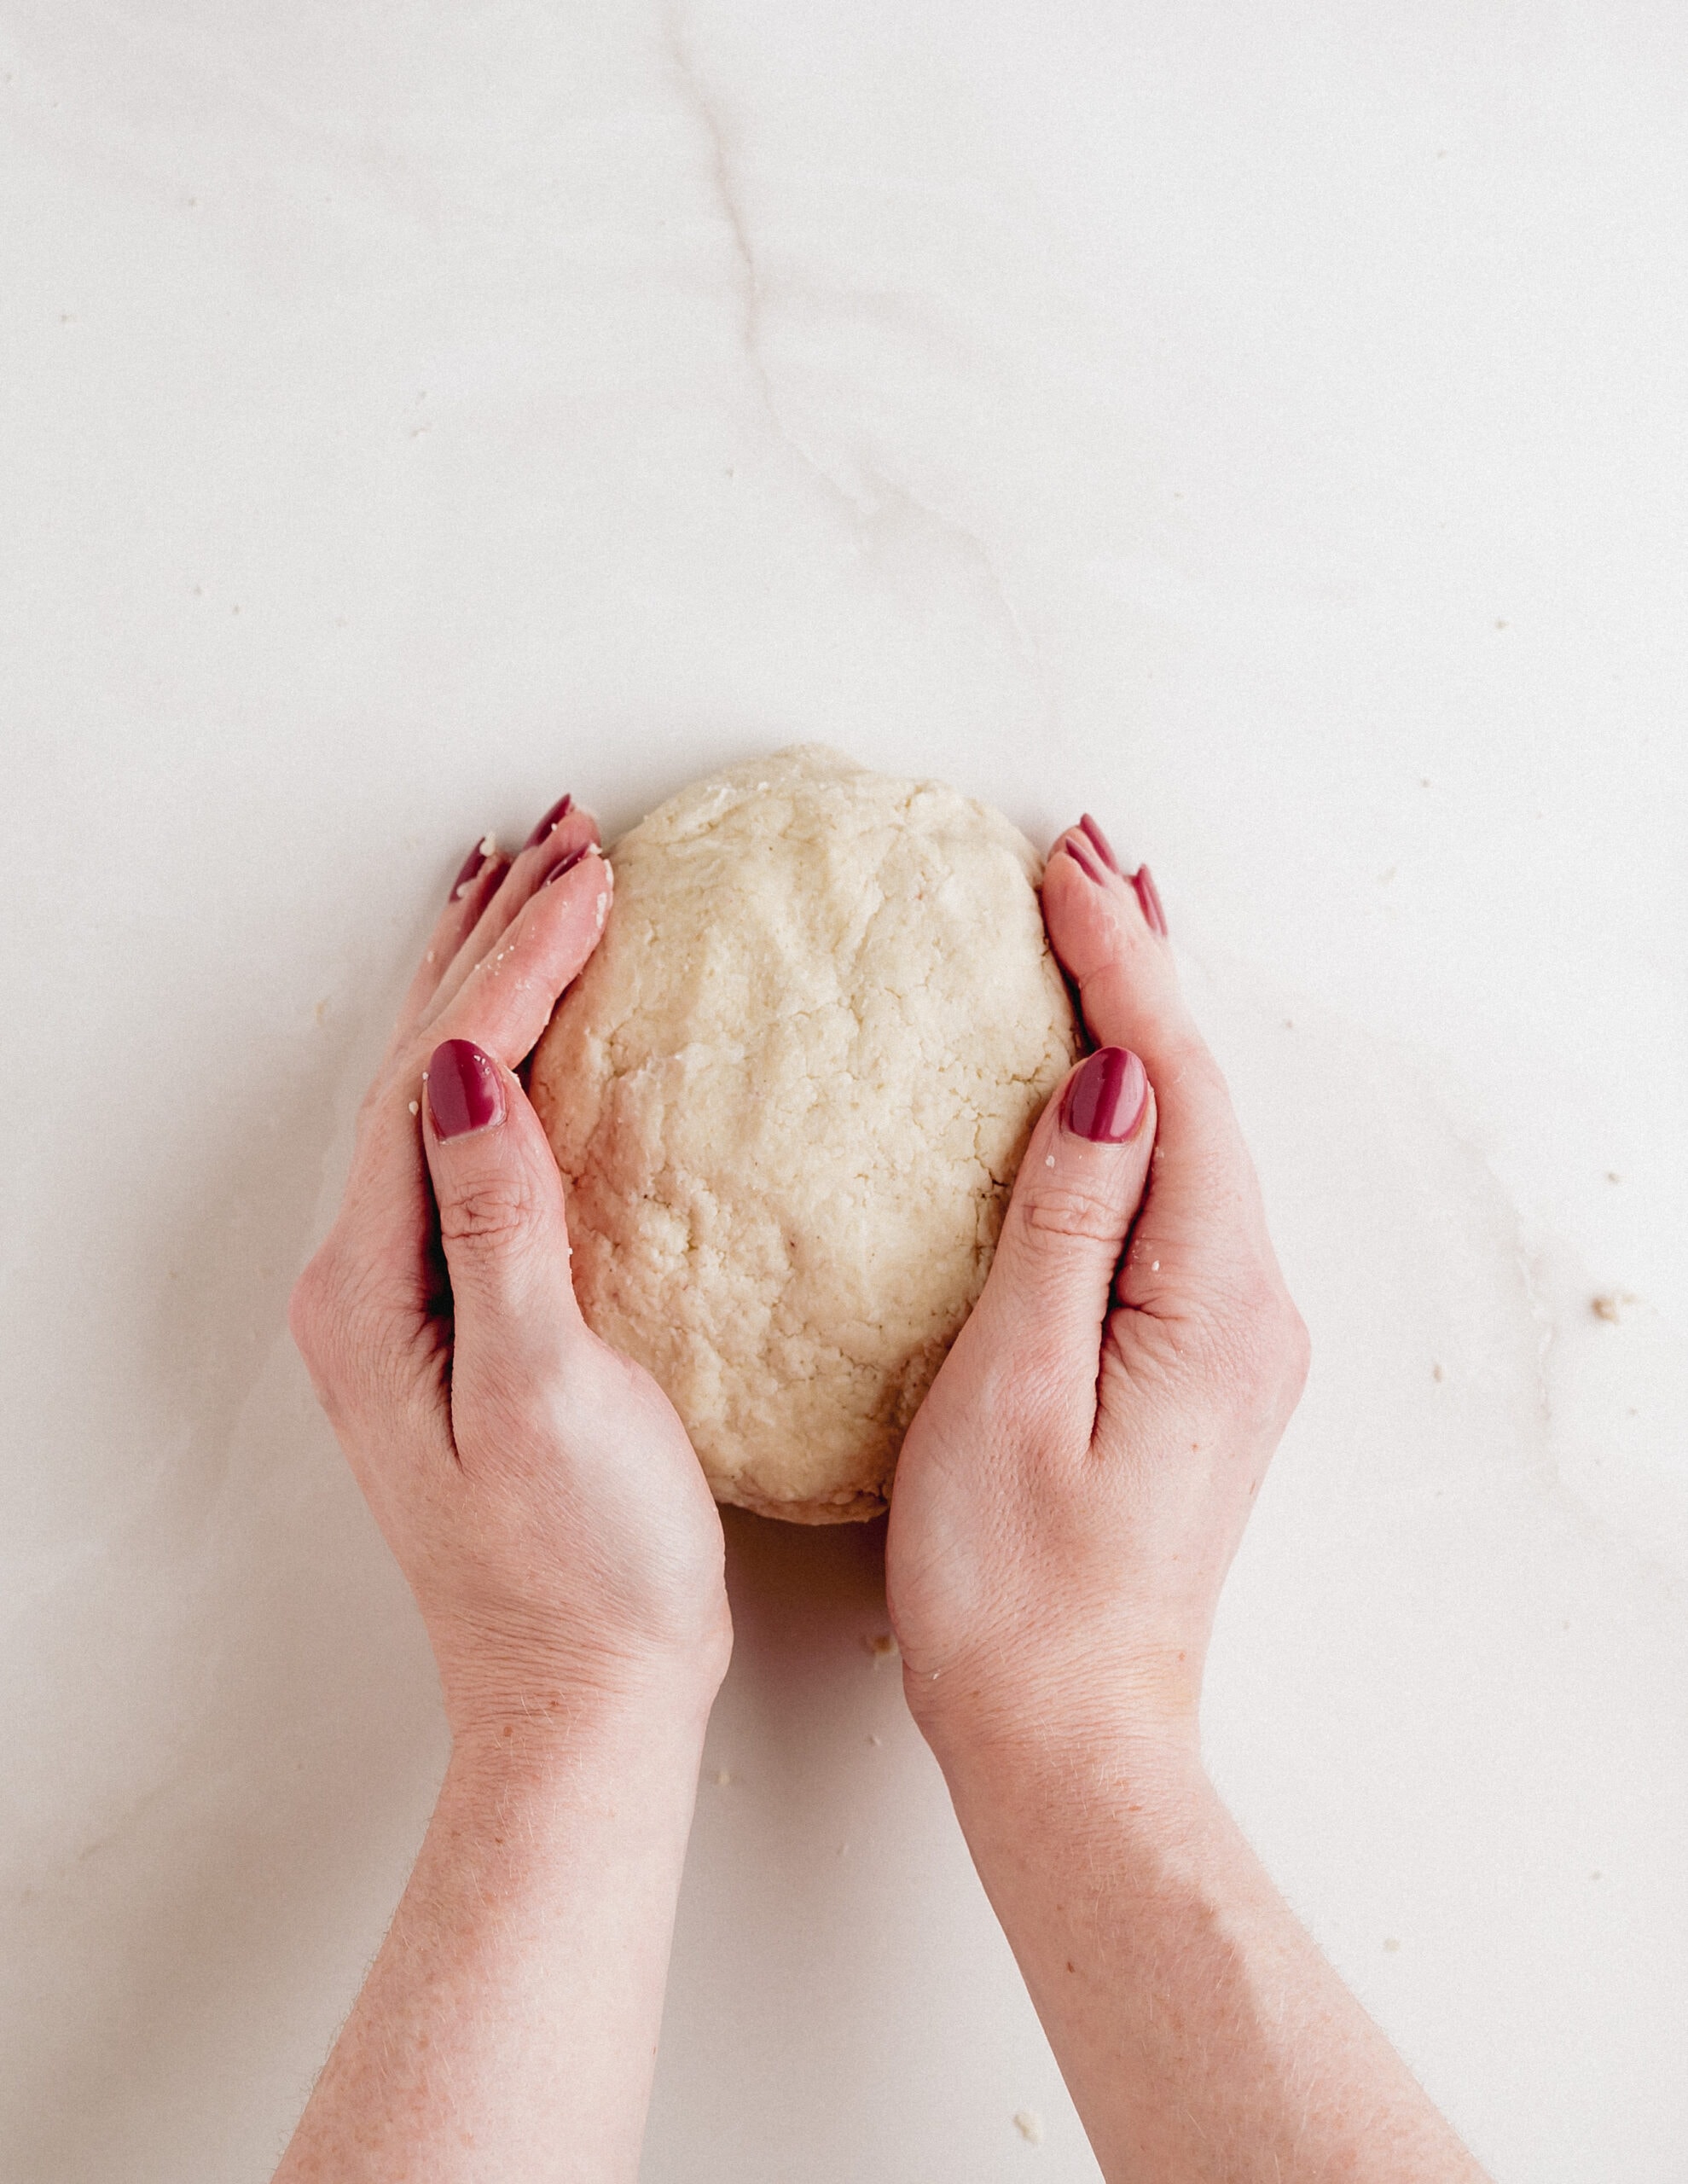 A large mound of pastry dough molded together with two hands.